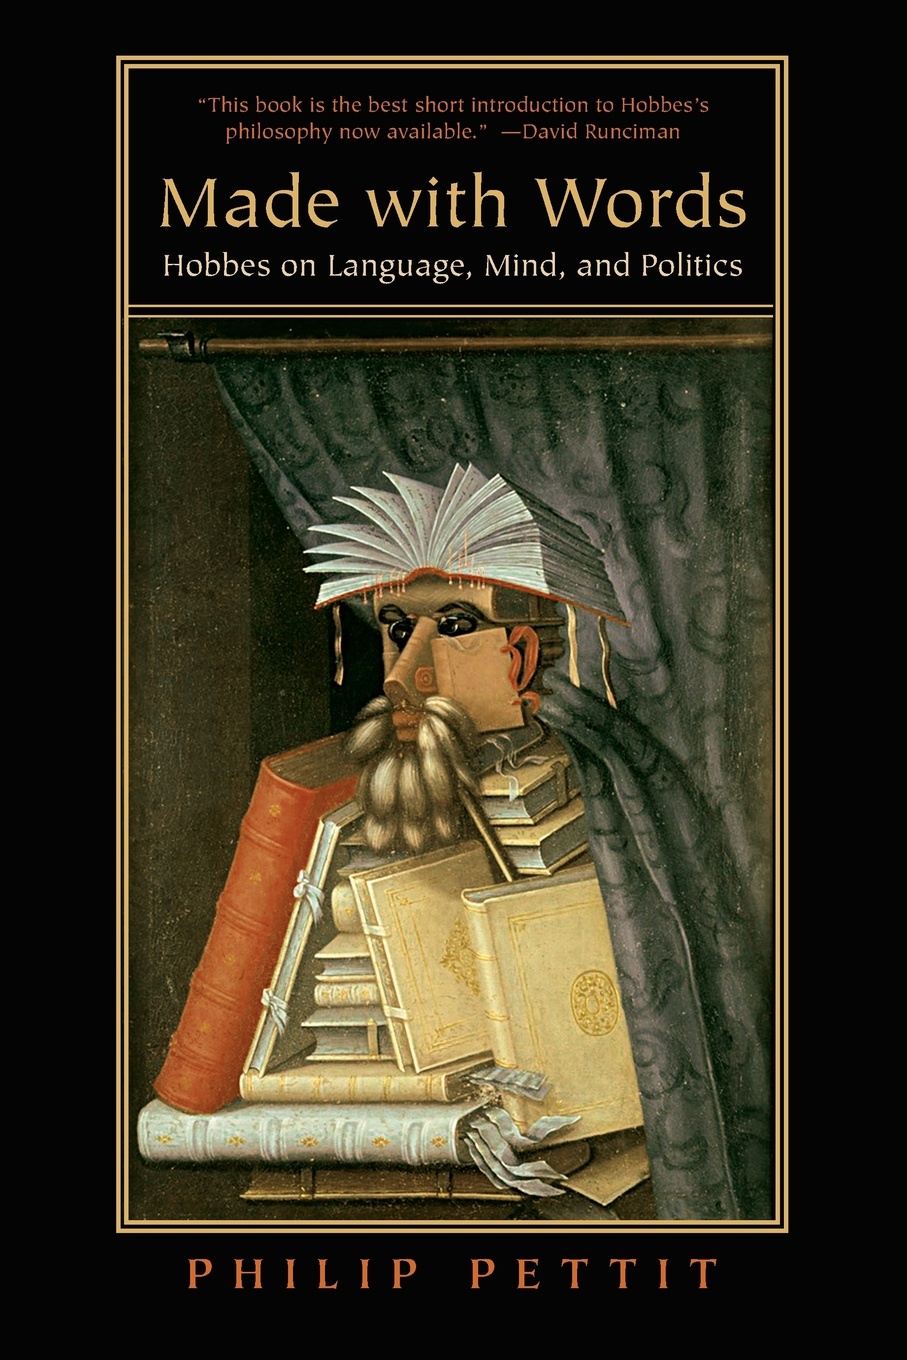 Made with Words. Hobbes on Language, Mind, and Politics